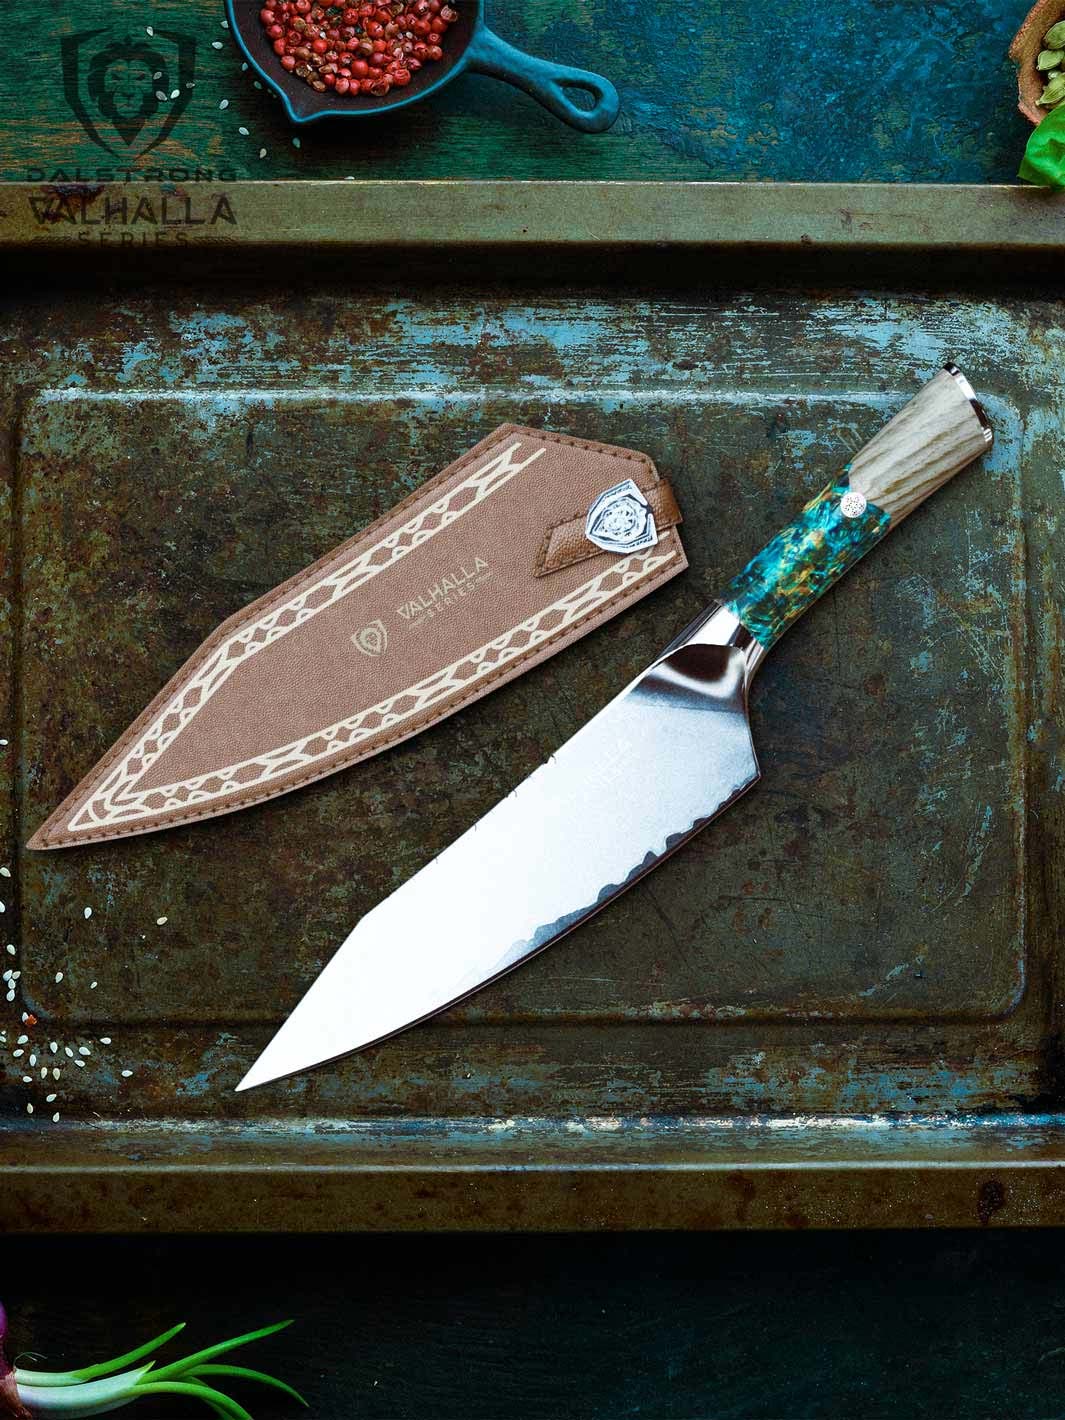 Dalstrong valhalla series 8 inch chef knife with wooden handle and sheath inside an old tray.